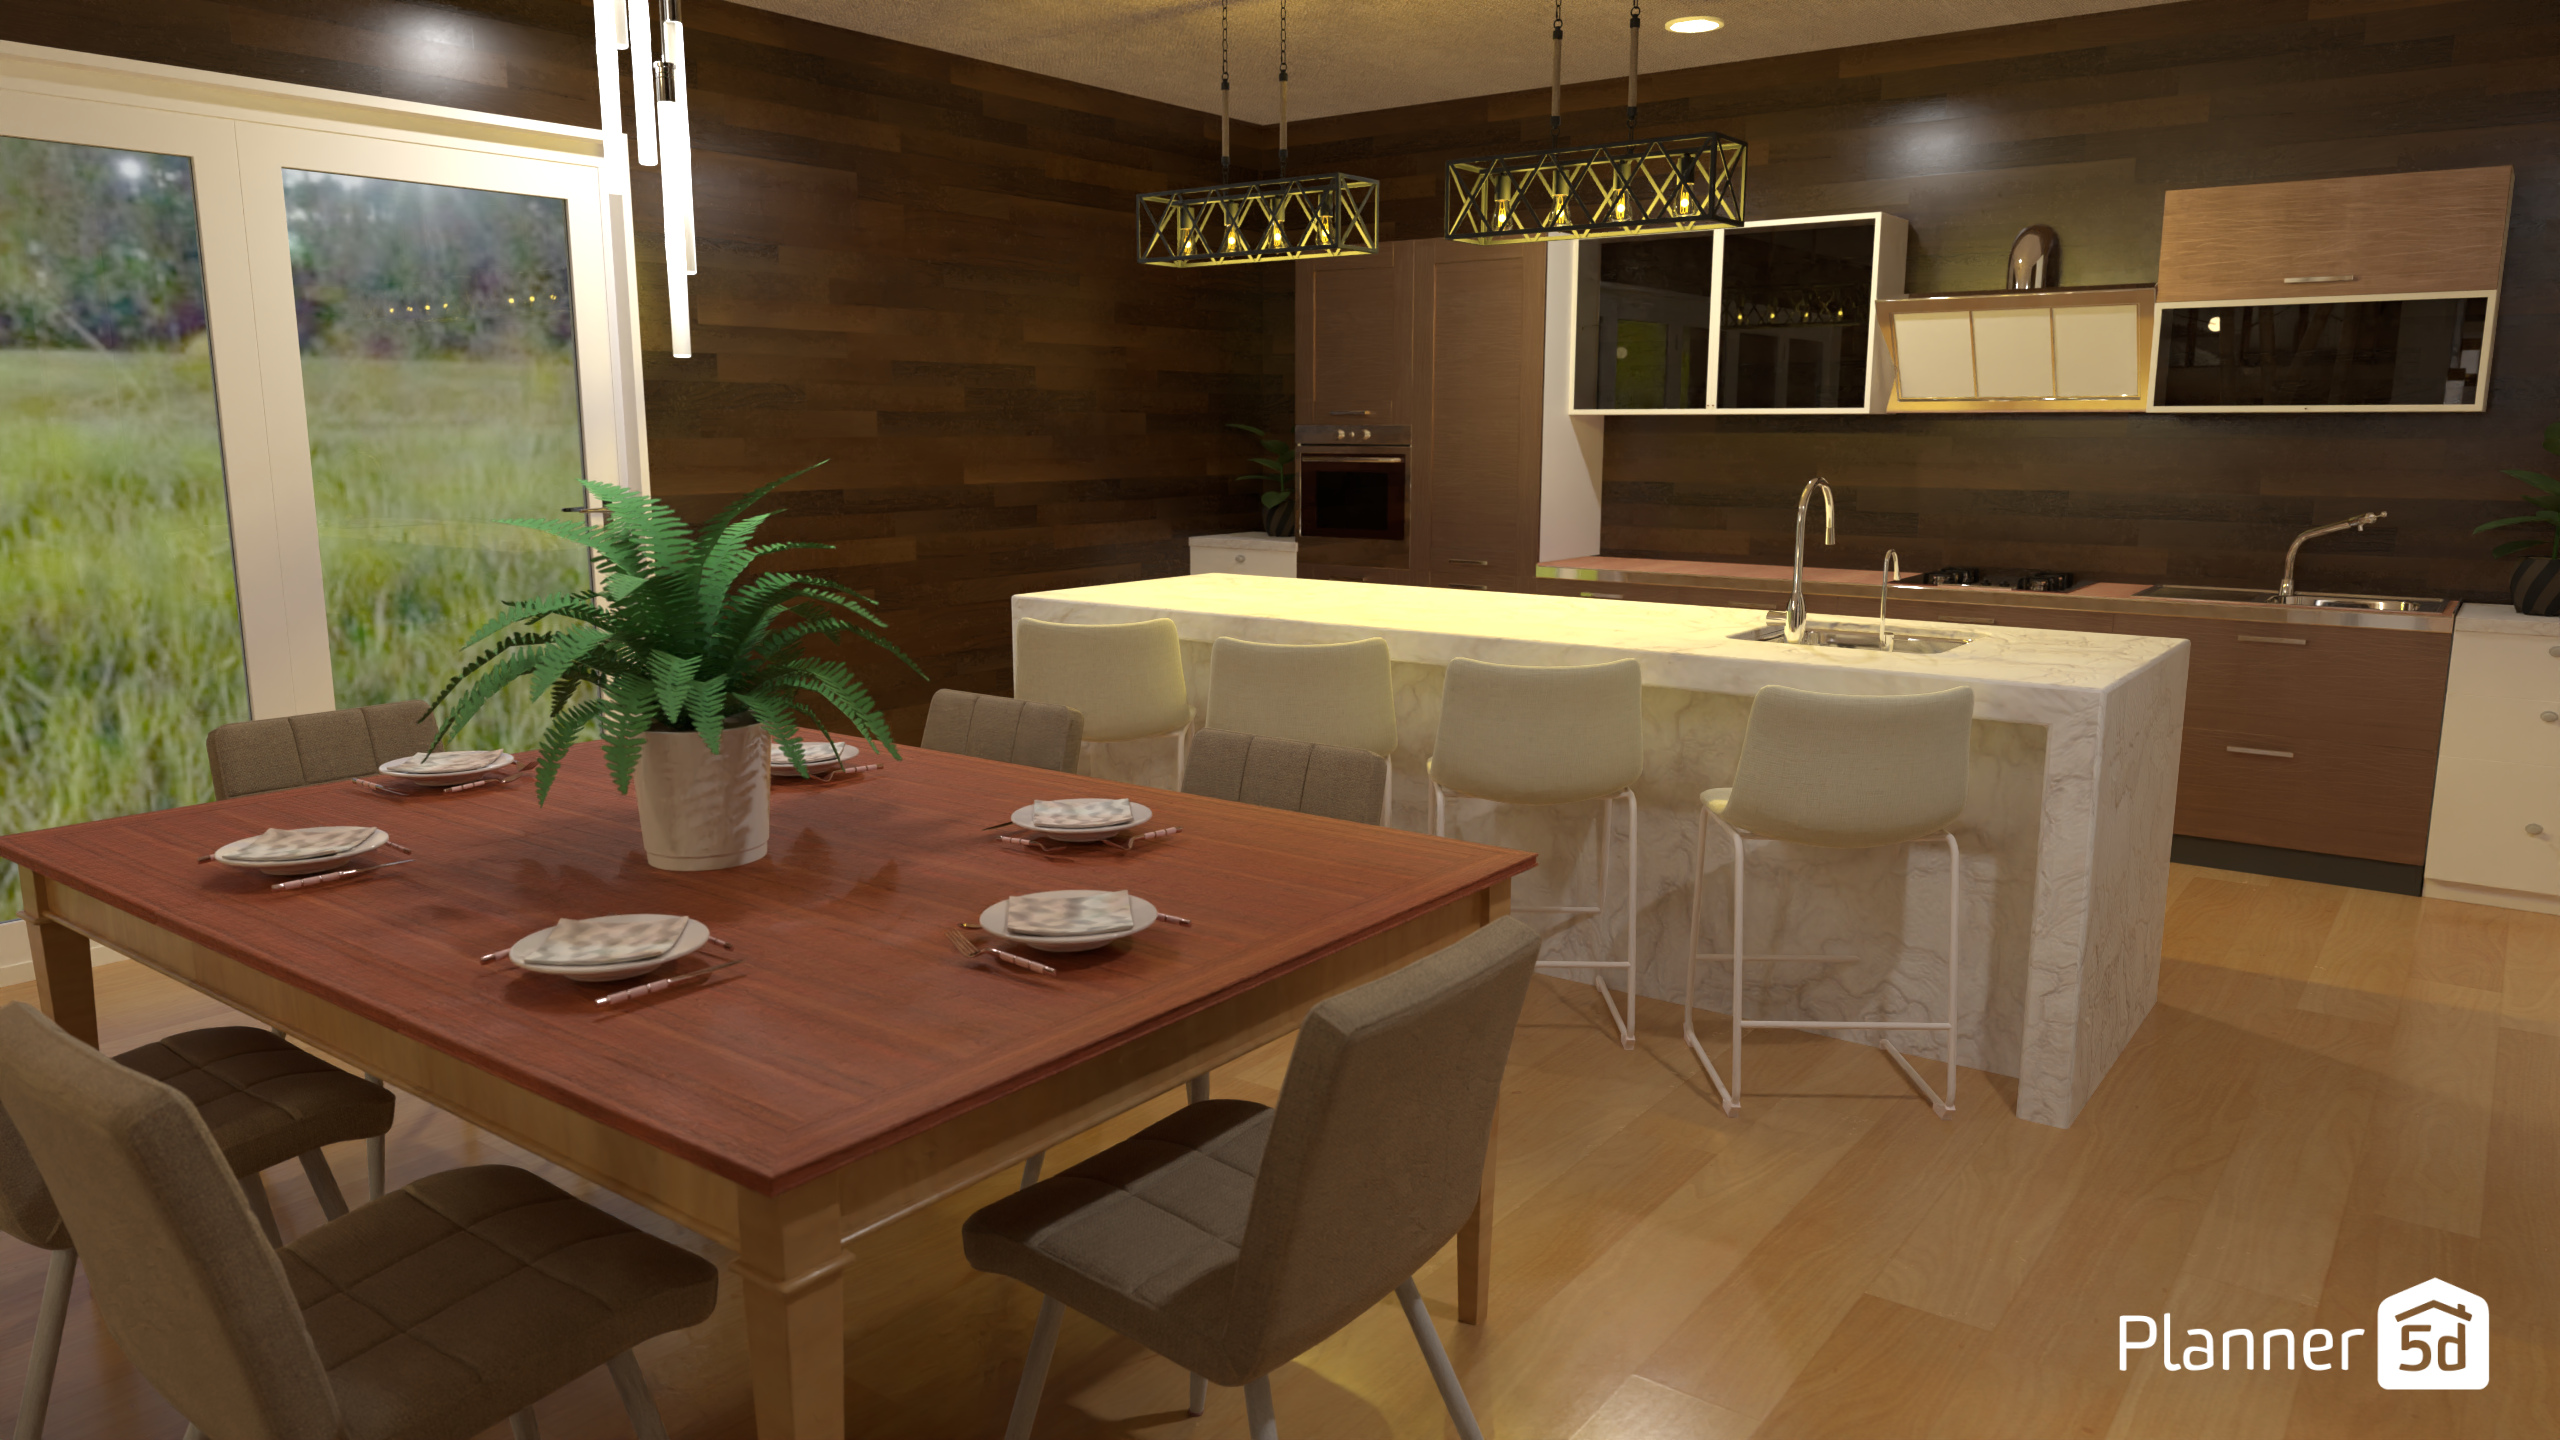 Dining + Kitchen Area 15068087 by Jason image